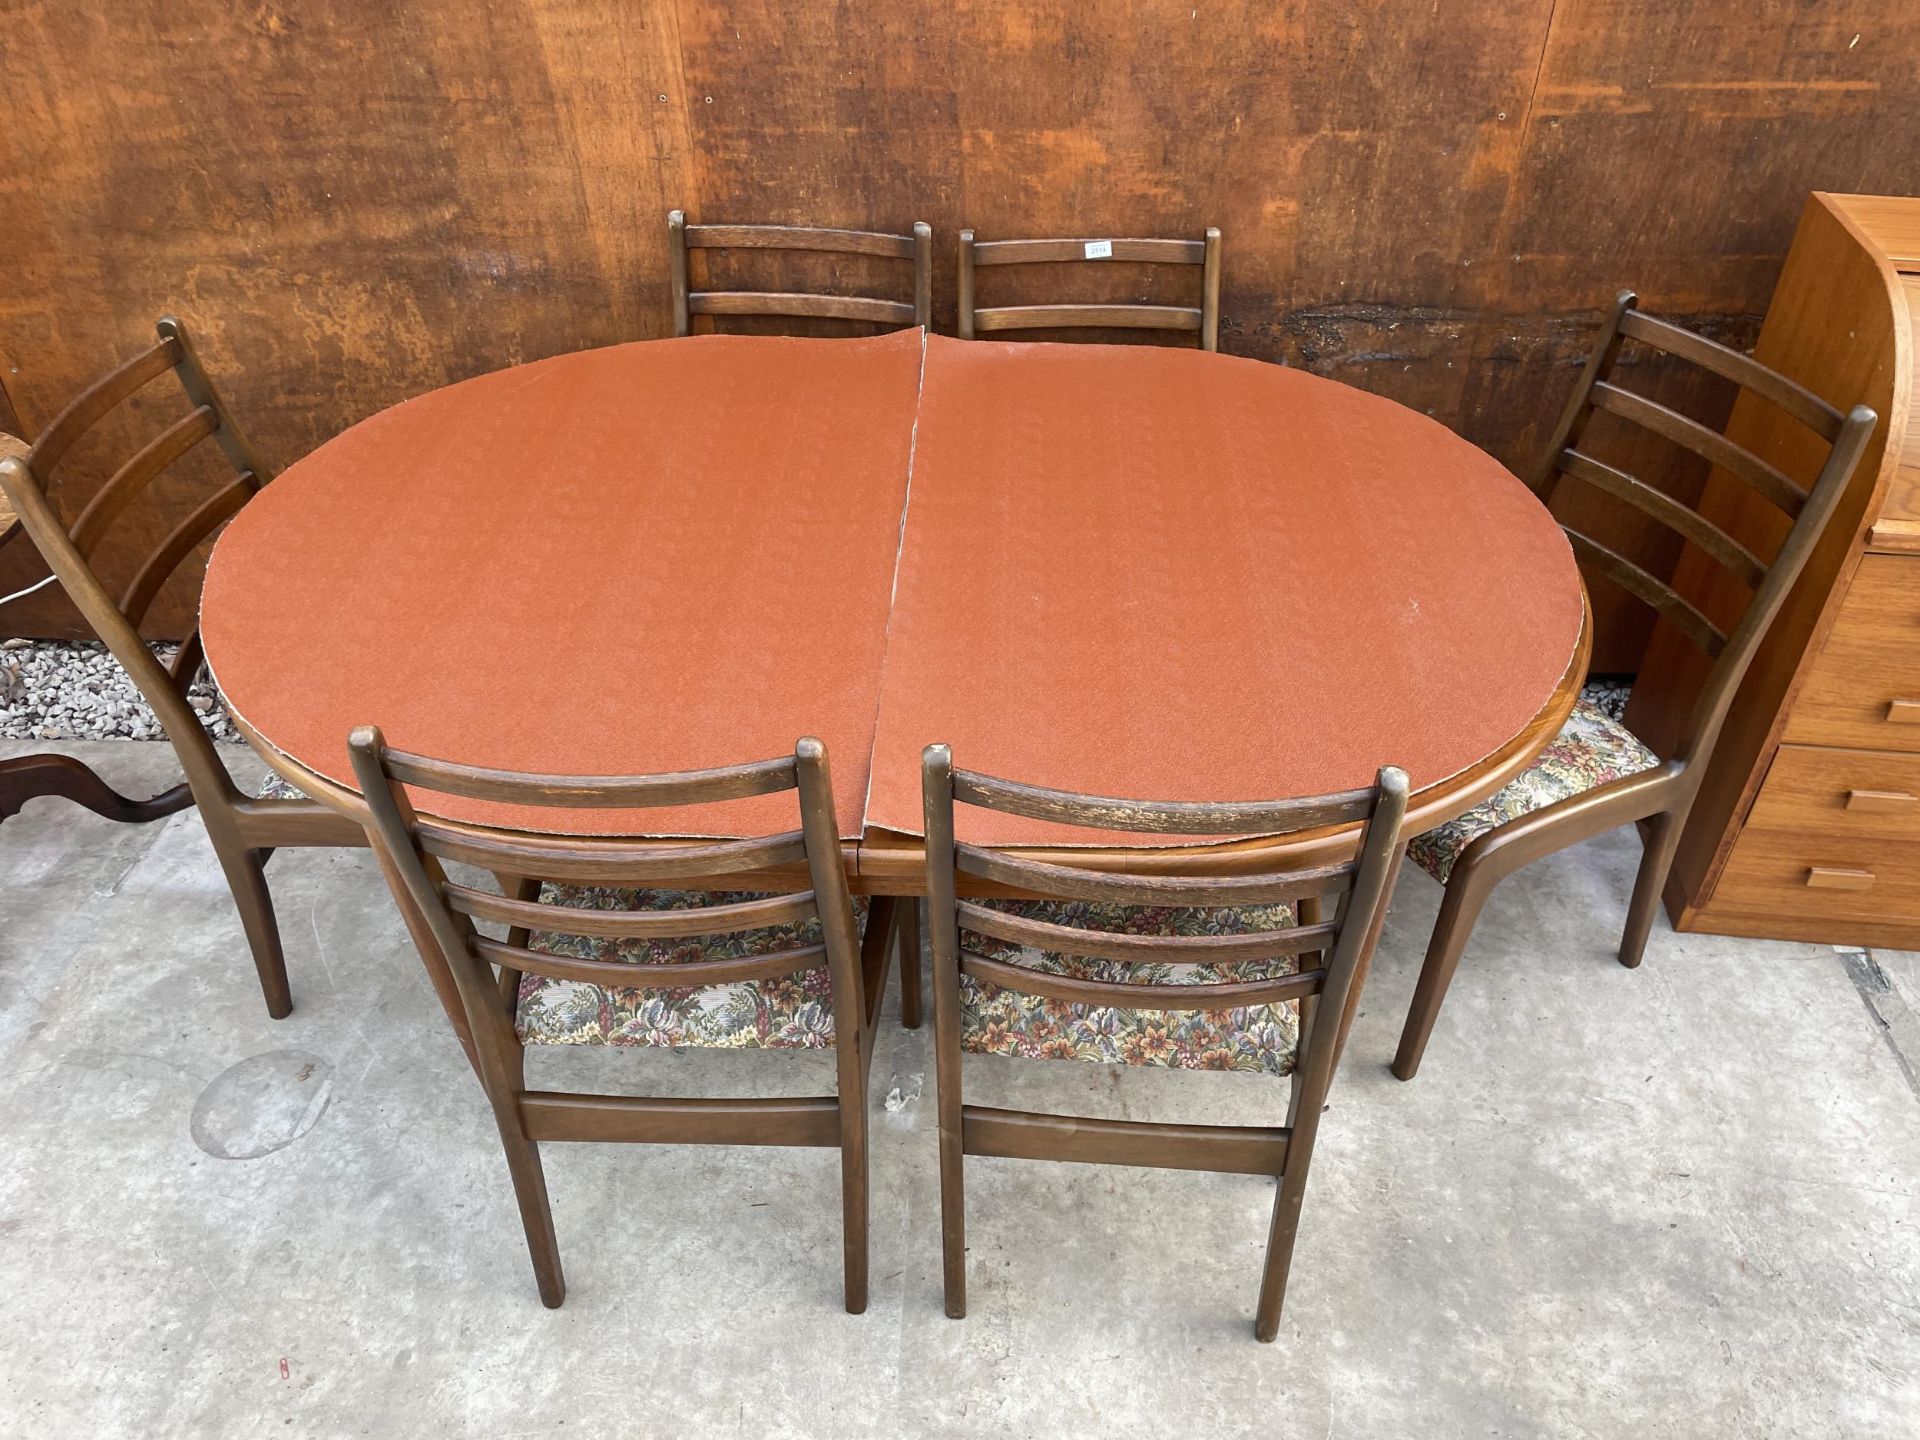 A G-PLAN RETRO TEAK EXTENDING DINING TABLE, 64 X 44" (LEAF 18") AND SIX LADDERBACK DINING CHAIRS - Image 7 of 7